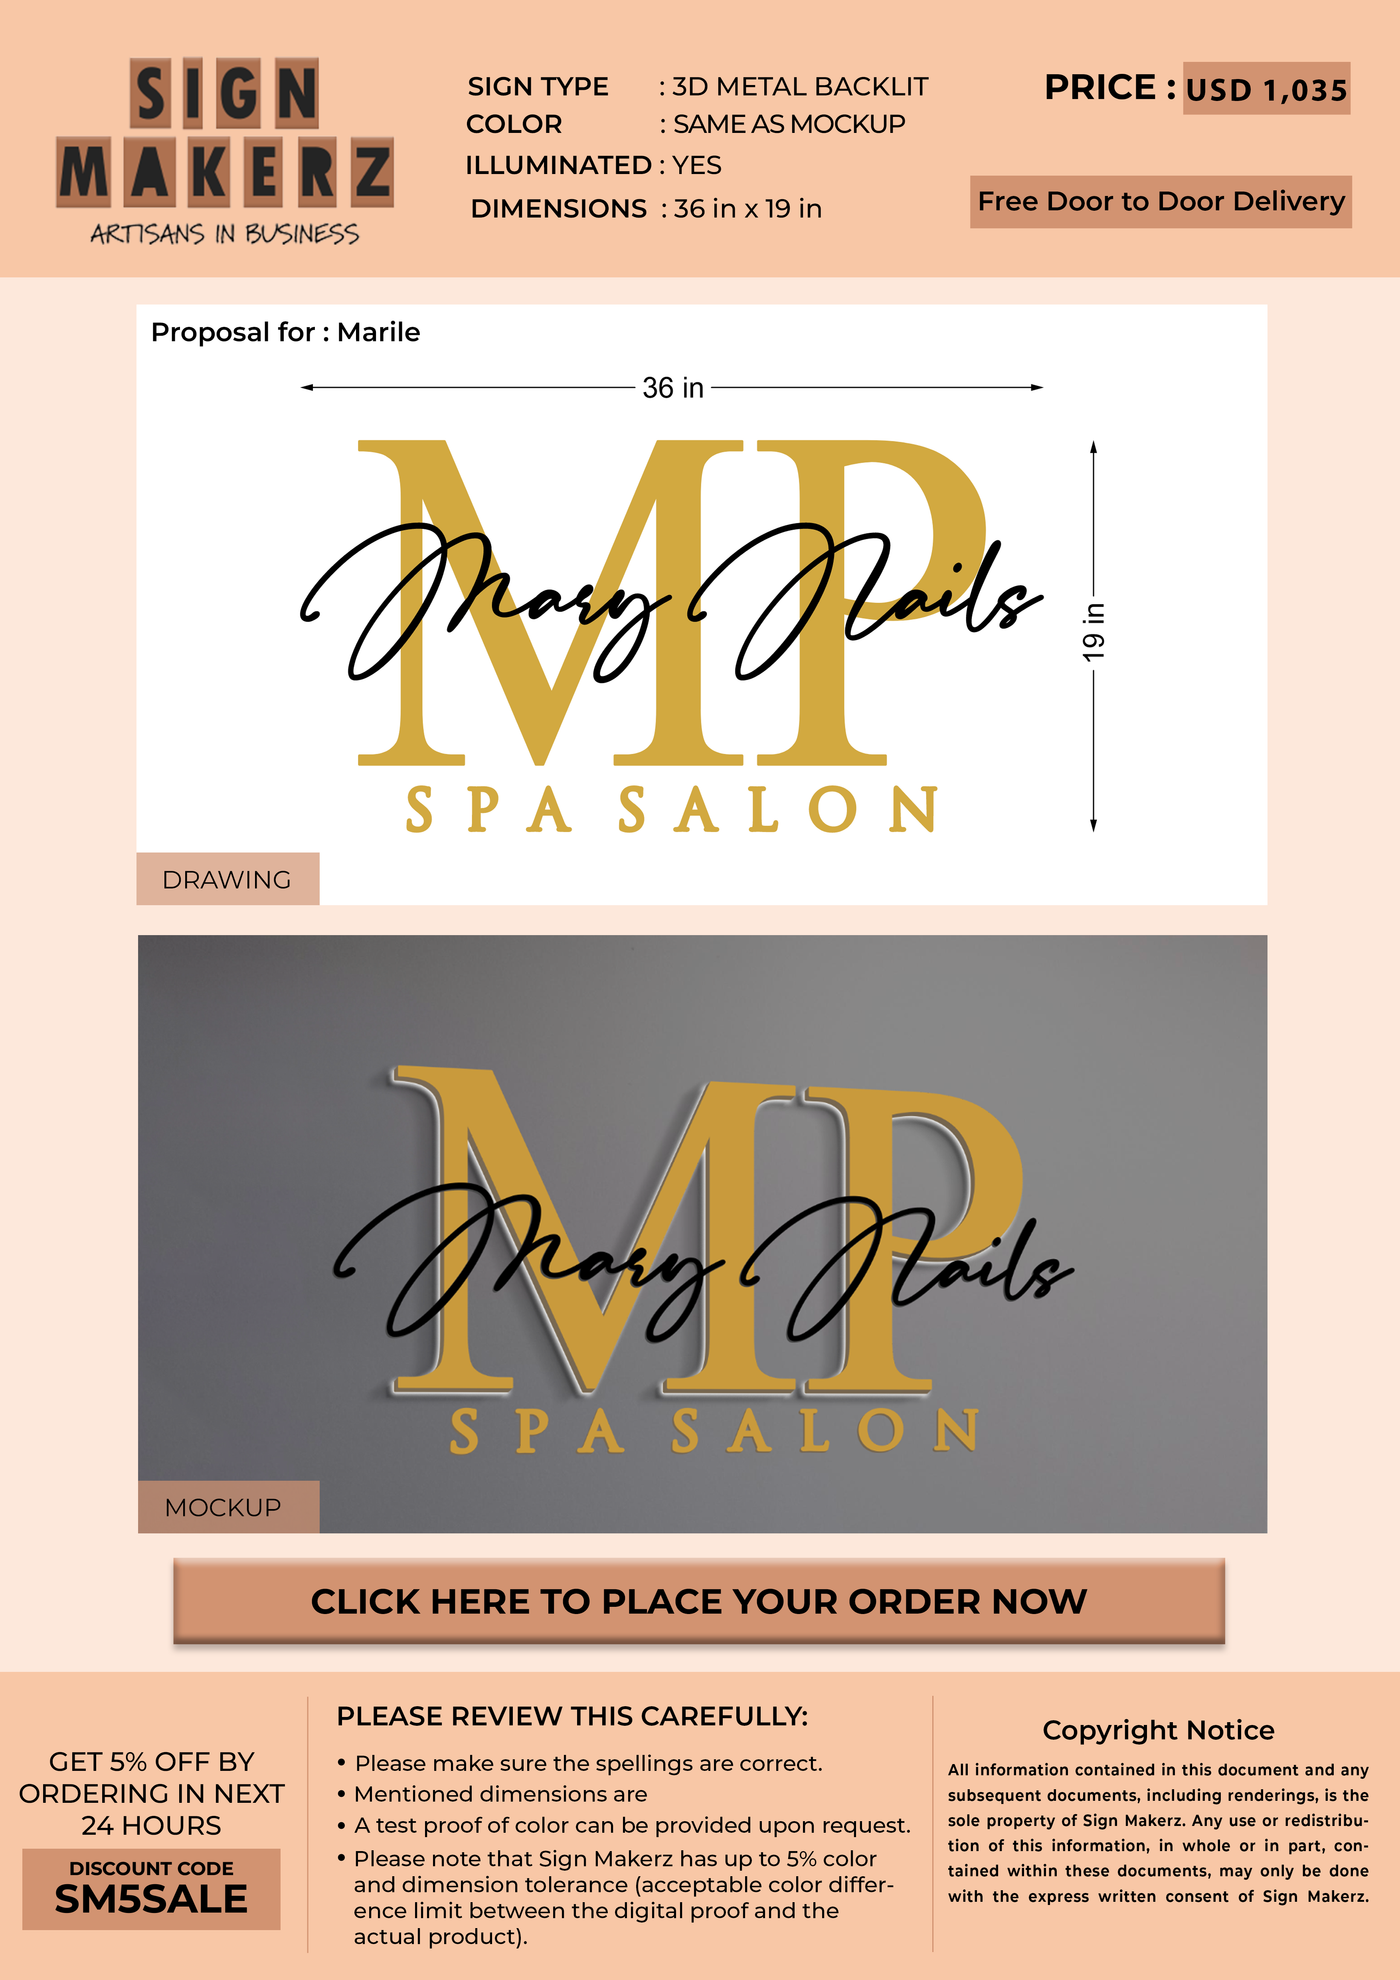 Business signage for Marile